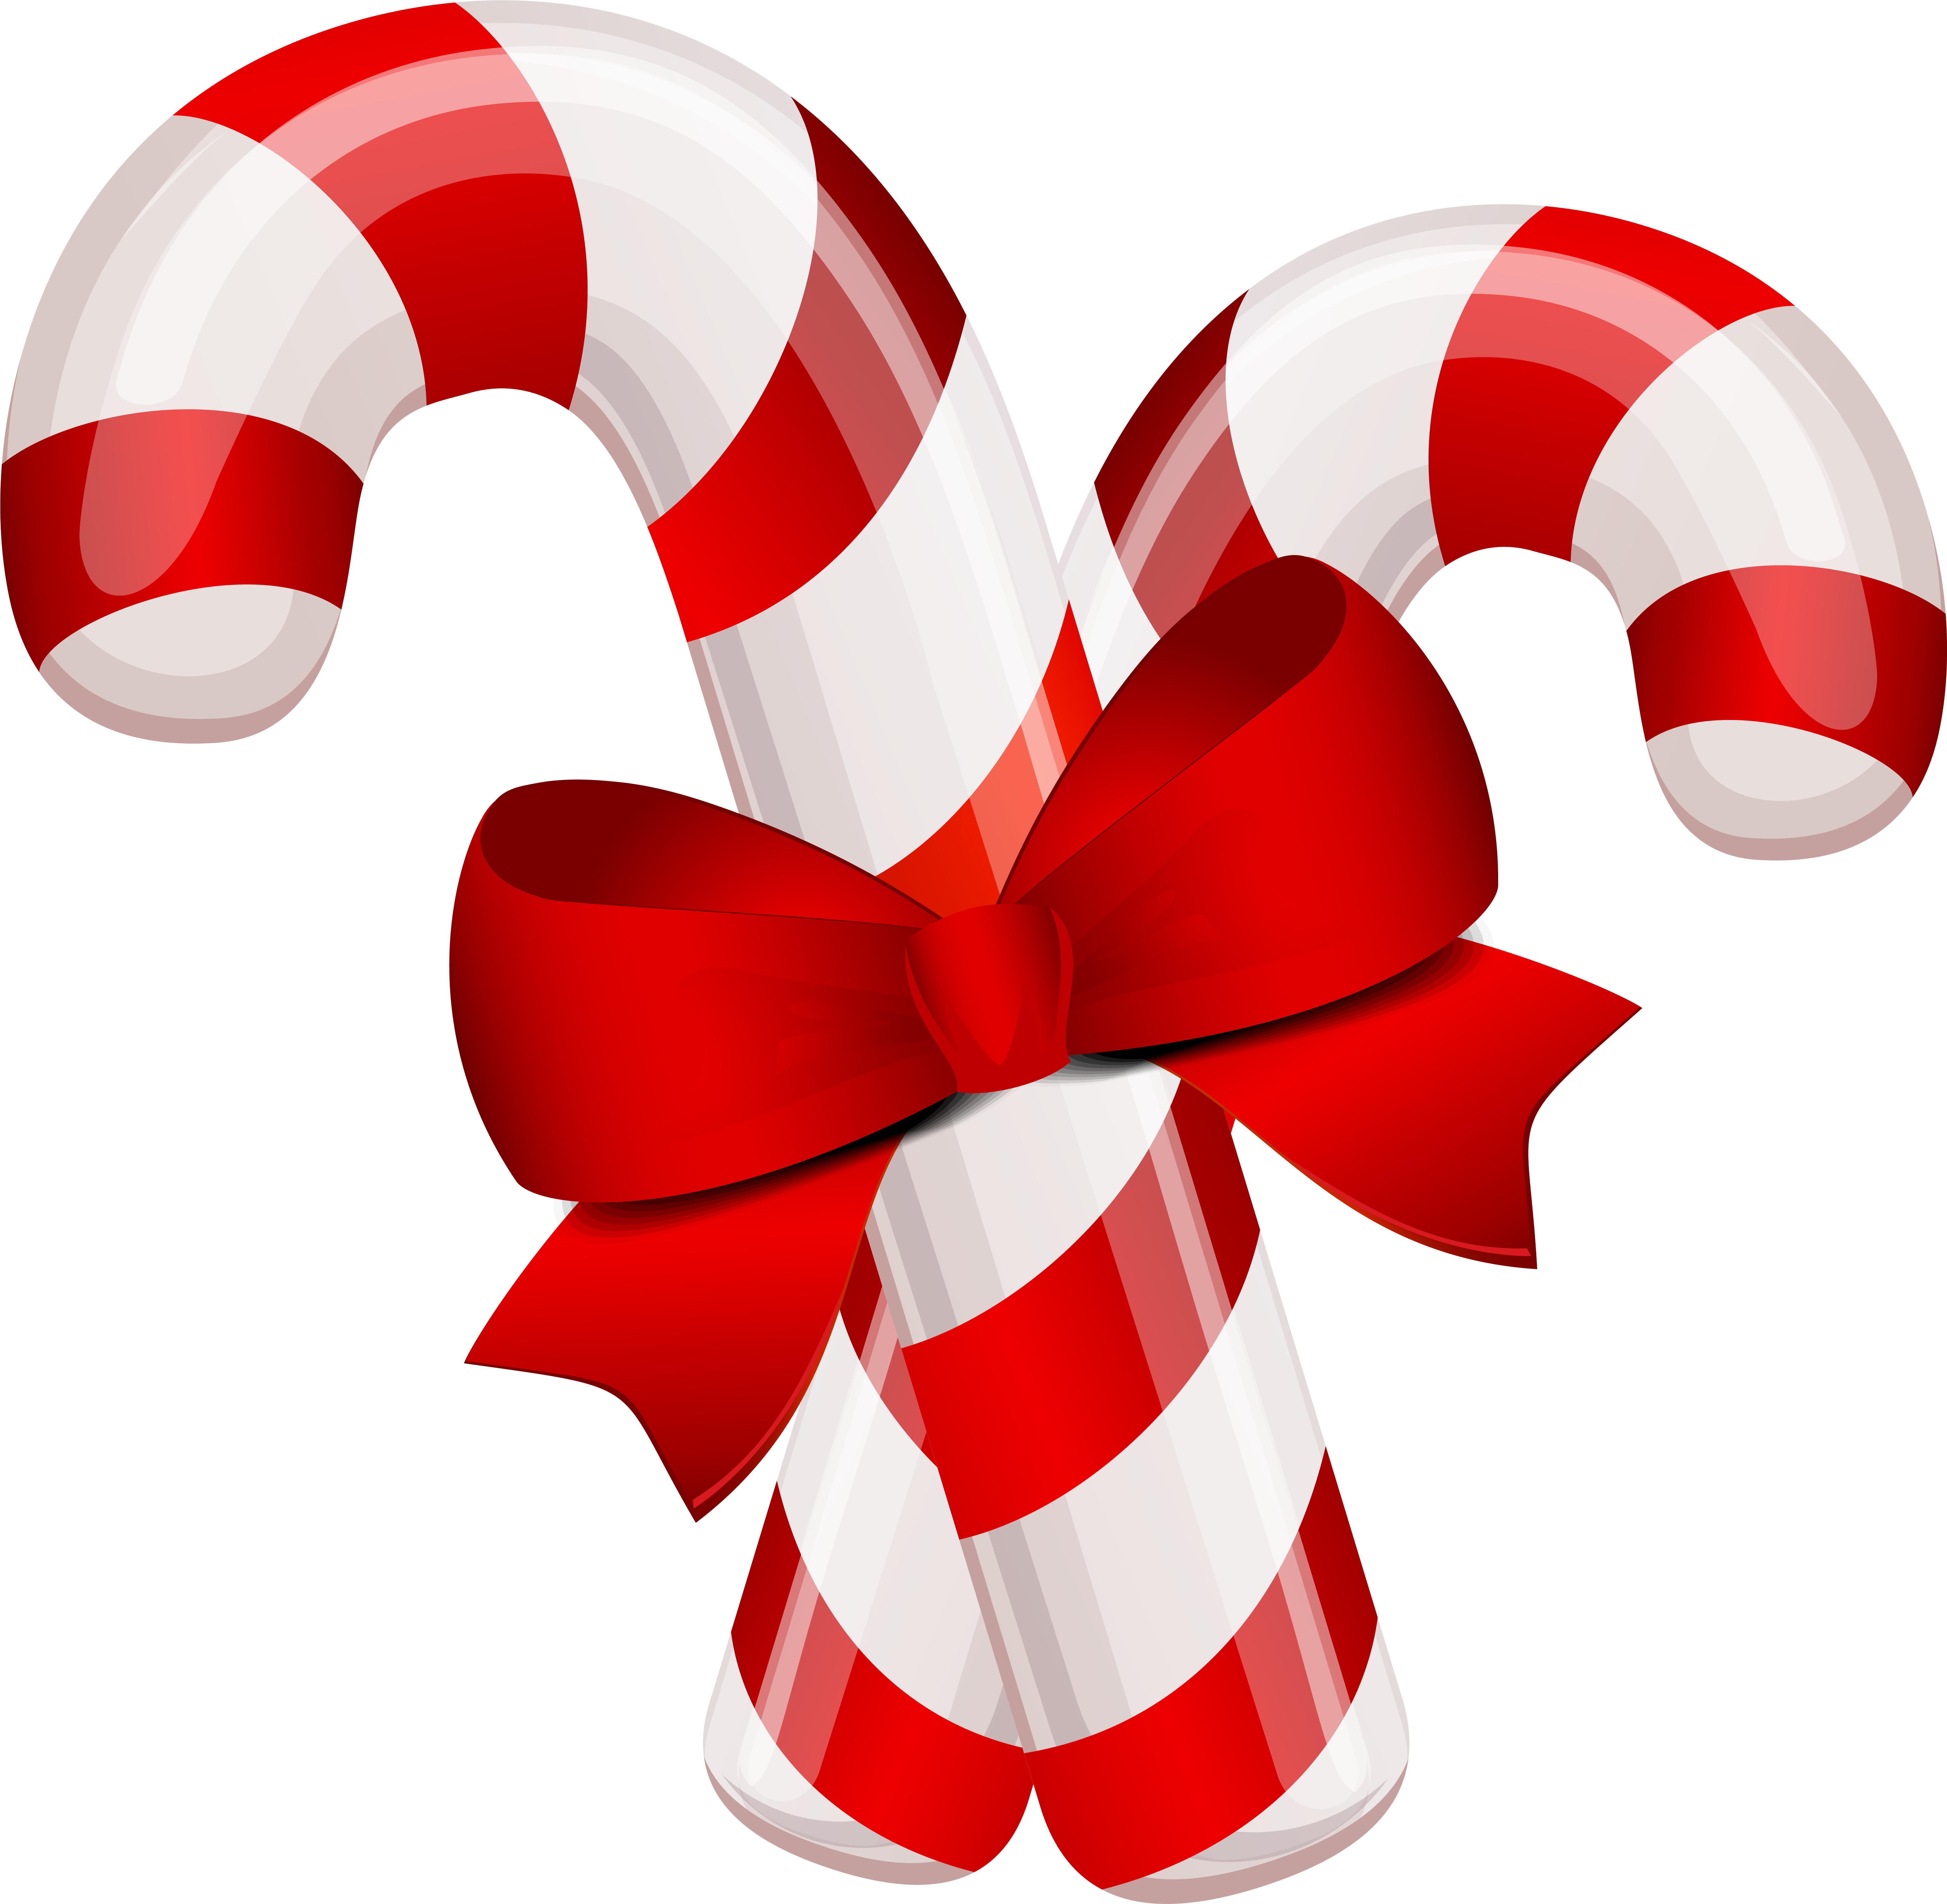 Download Candy Cane Stick Candy Candy Corn Christmas Clip Art